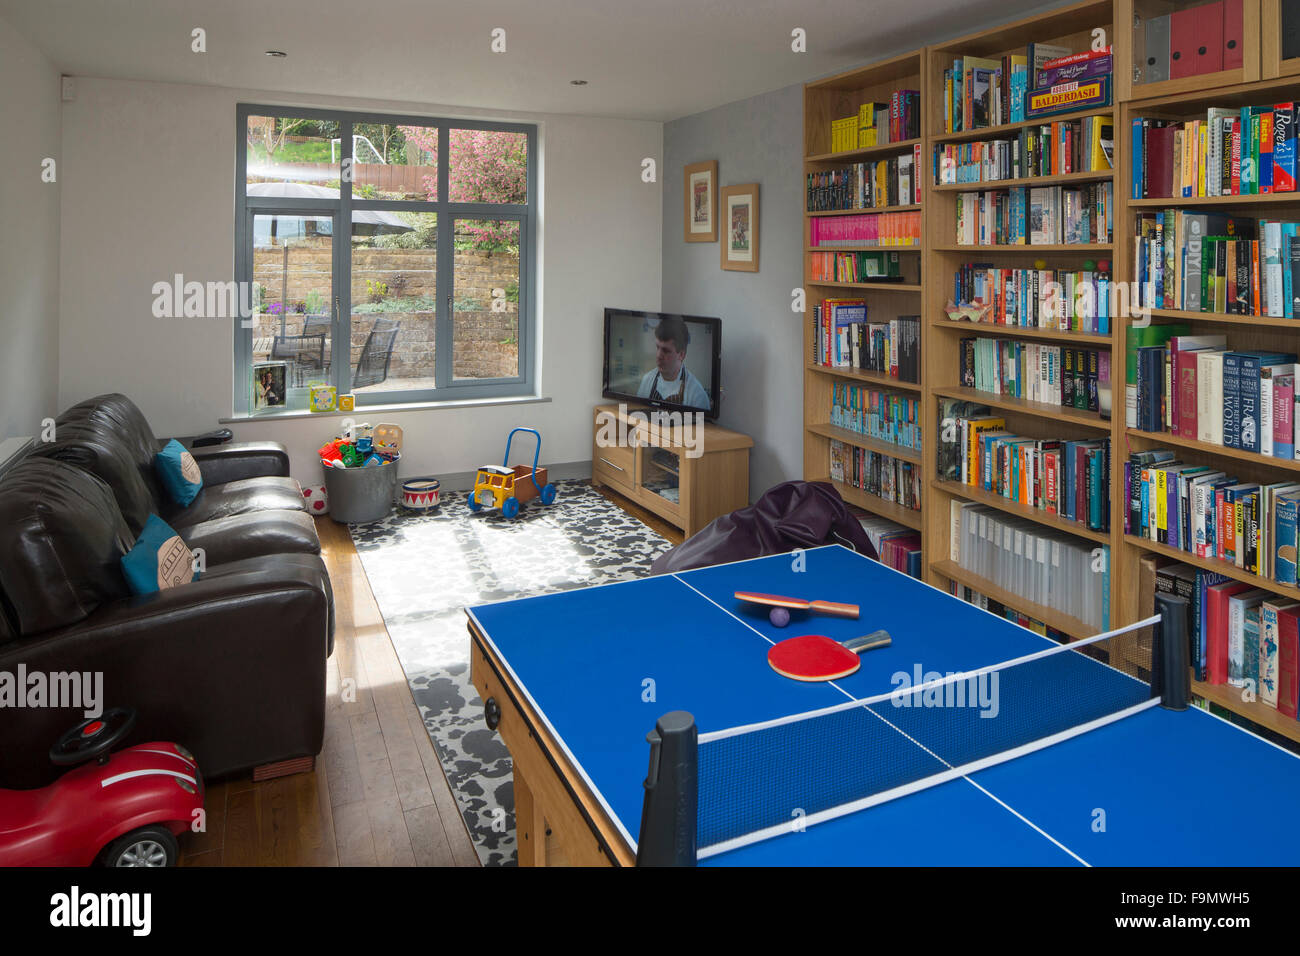 Playroom showing table tennis table, bookcases and toys in a moden family home. Stock Photo